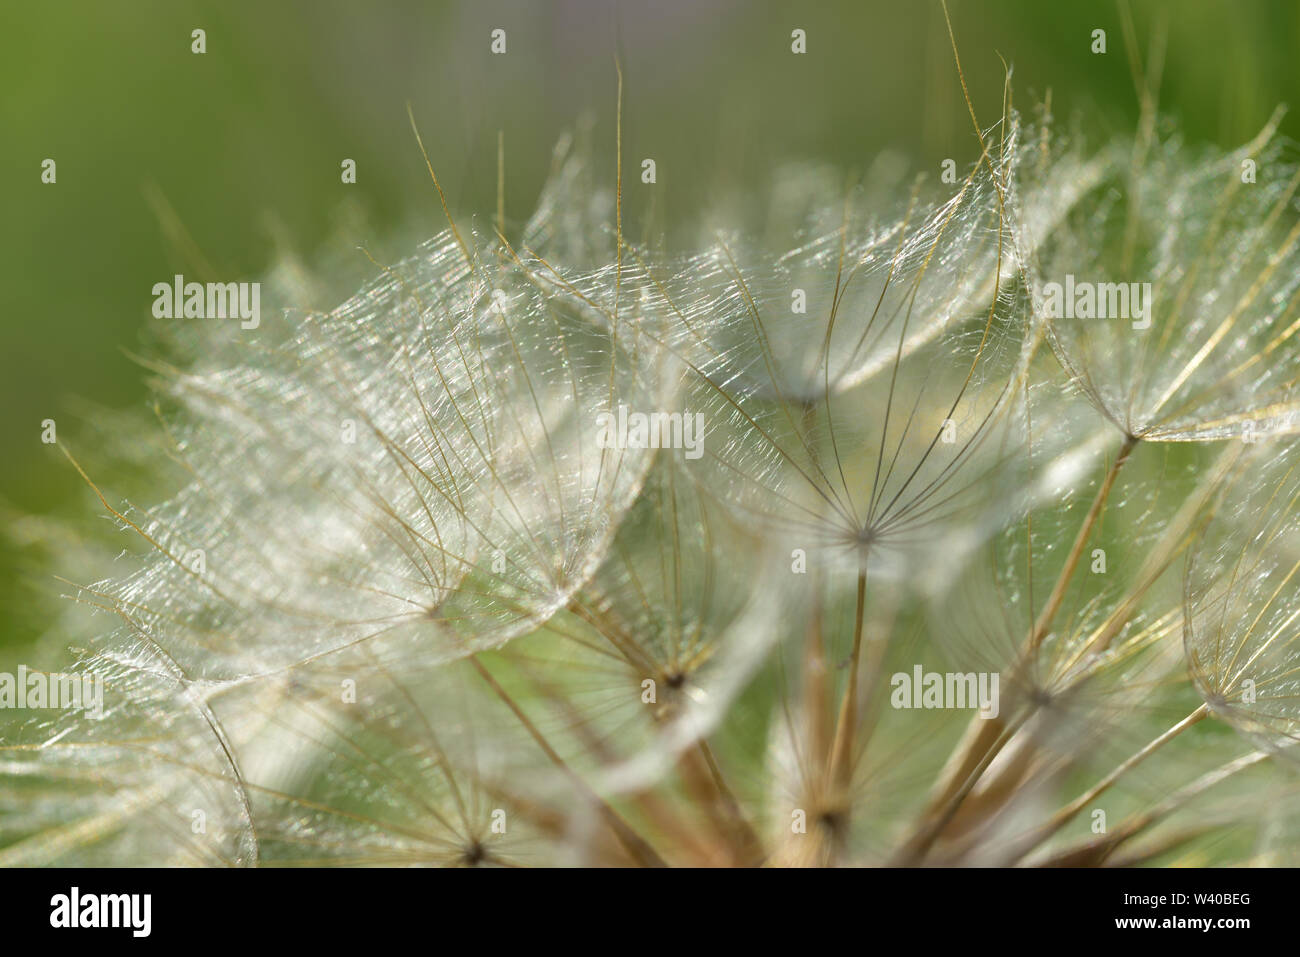 Background with the seed parakeets and flying seeds of a dandelion in summer in front of green background Stock Photo